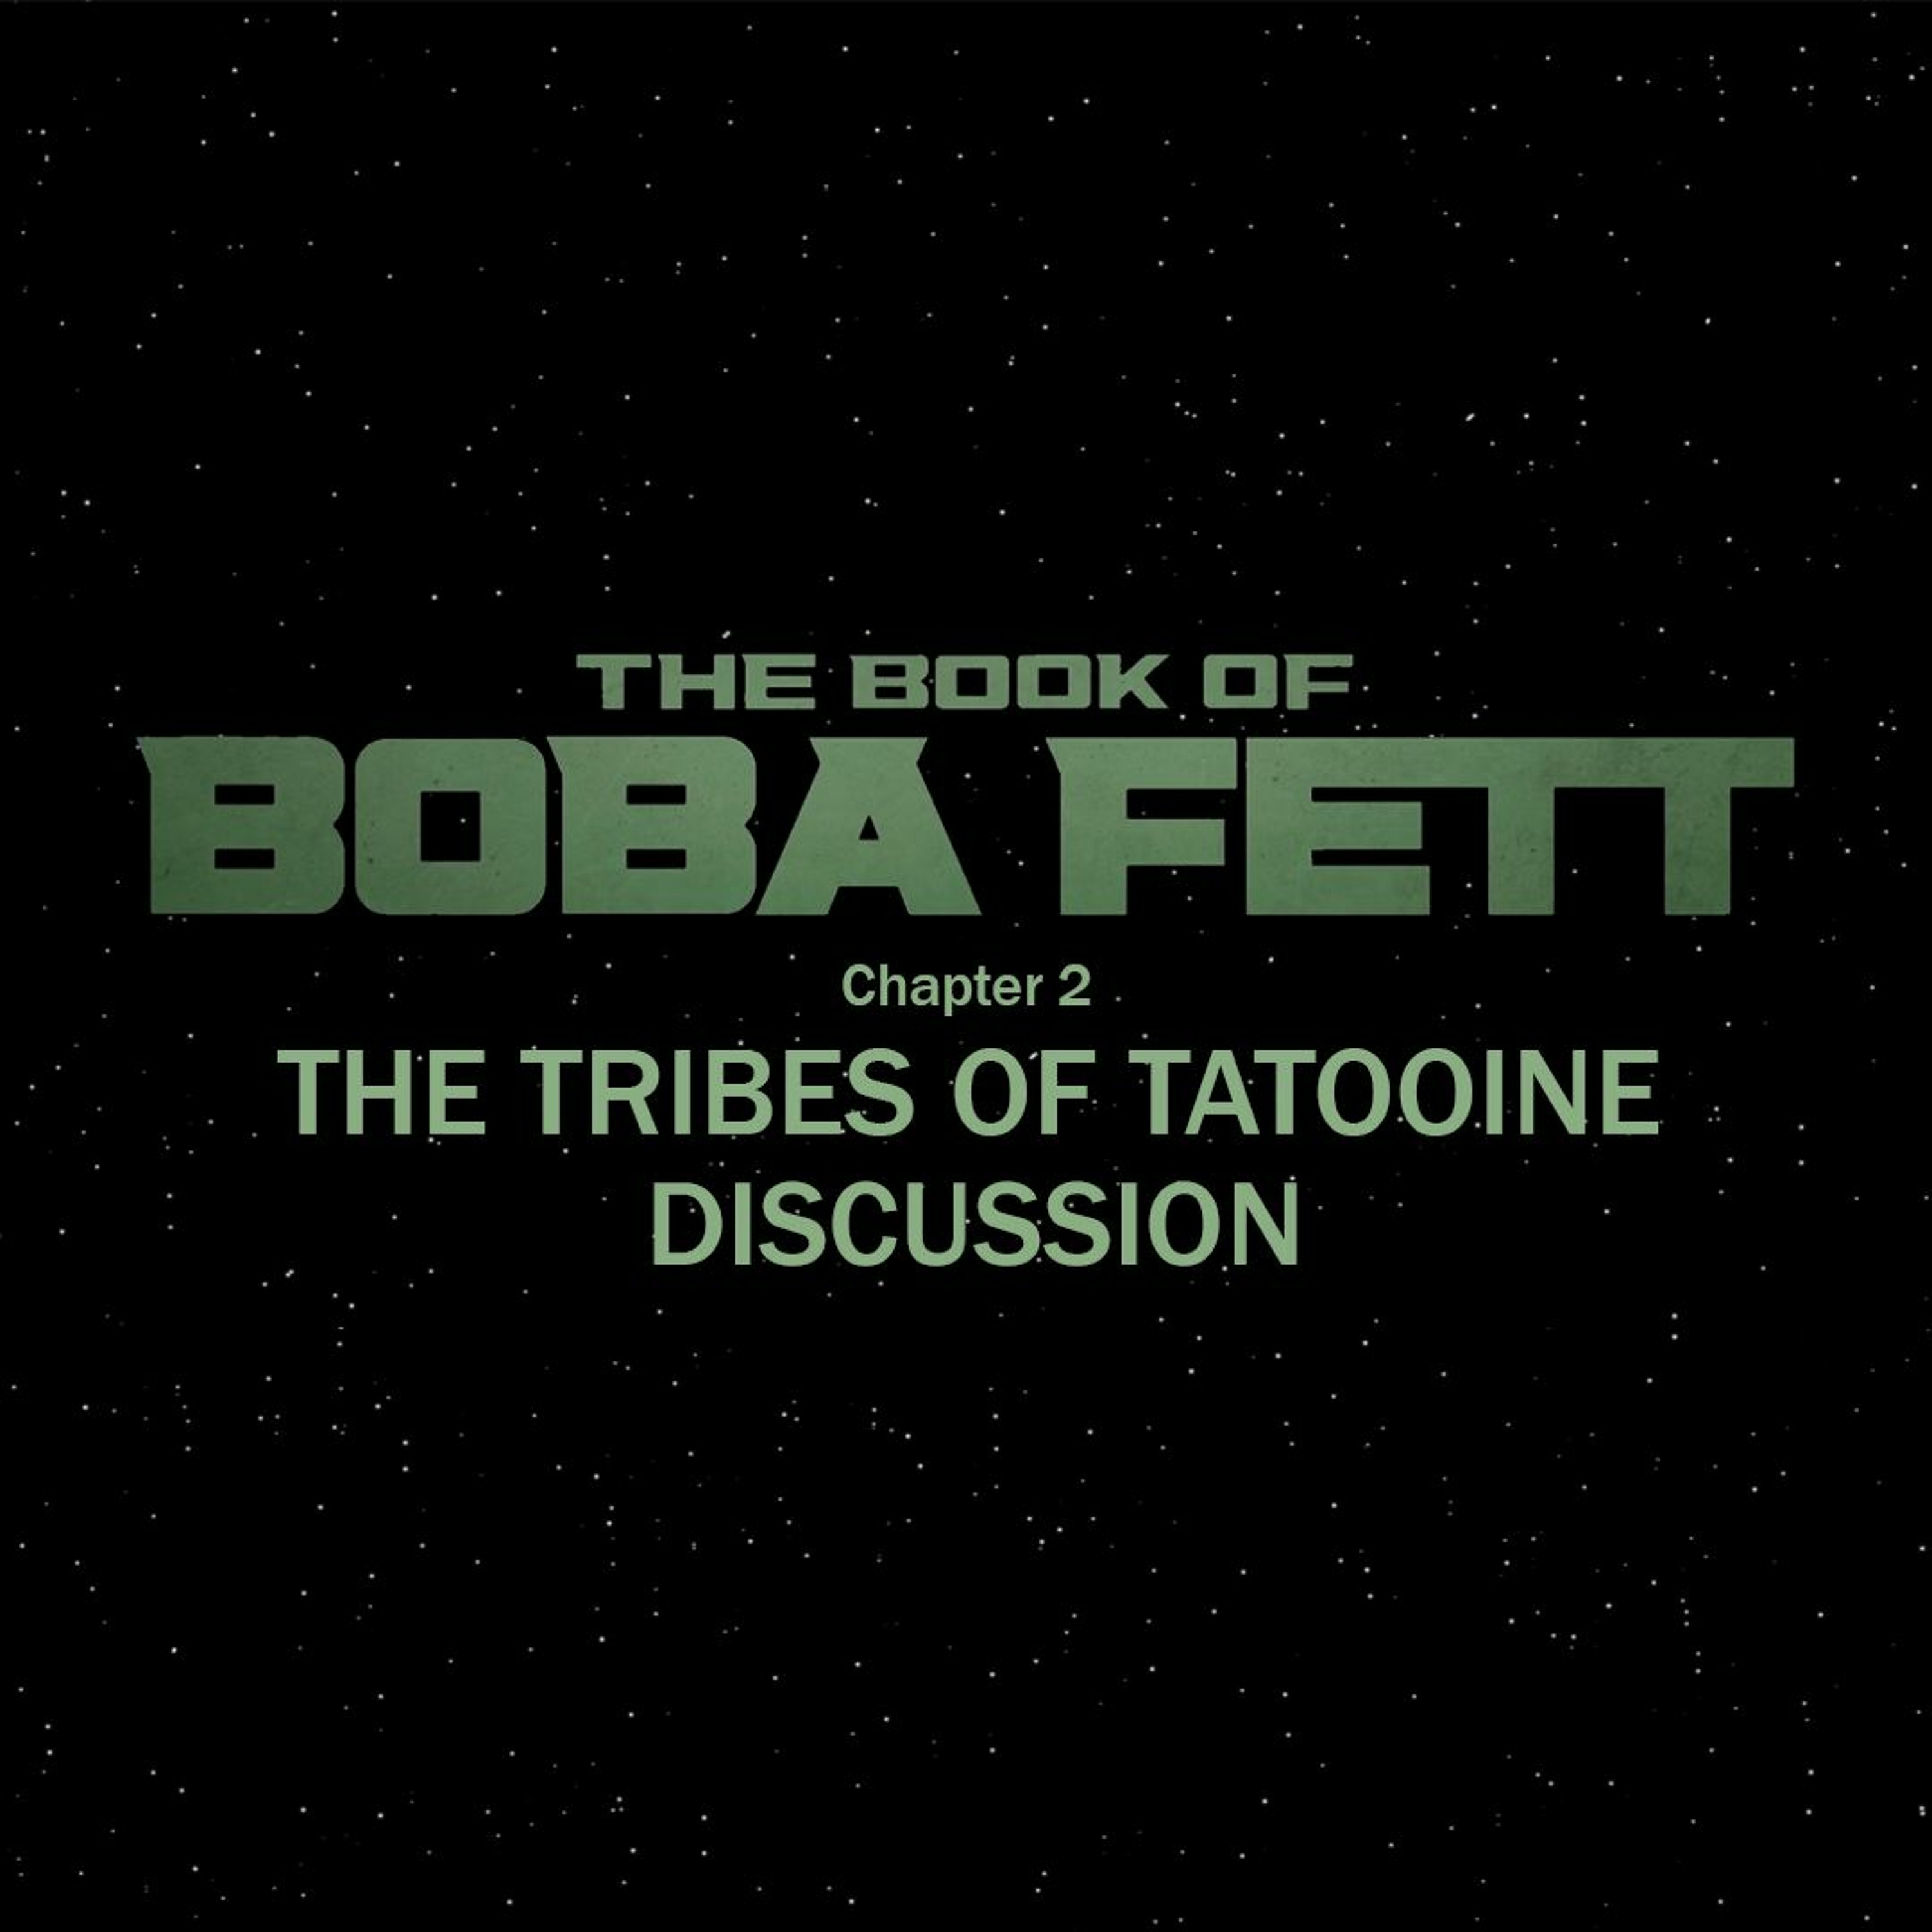 The Book of Boba Fett Chapter 2 - The Tribes of Tatooine